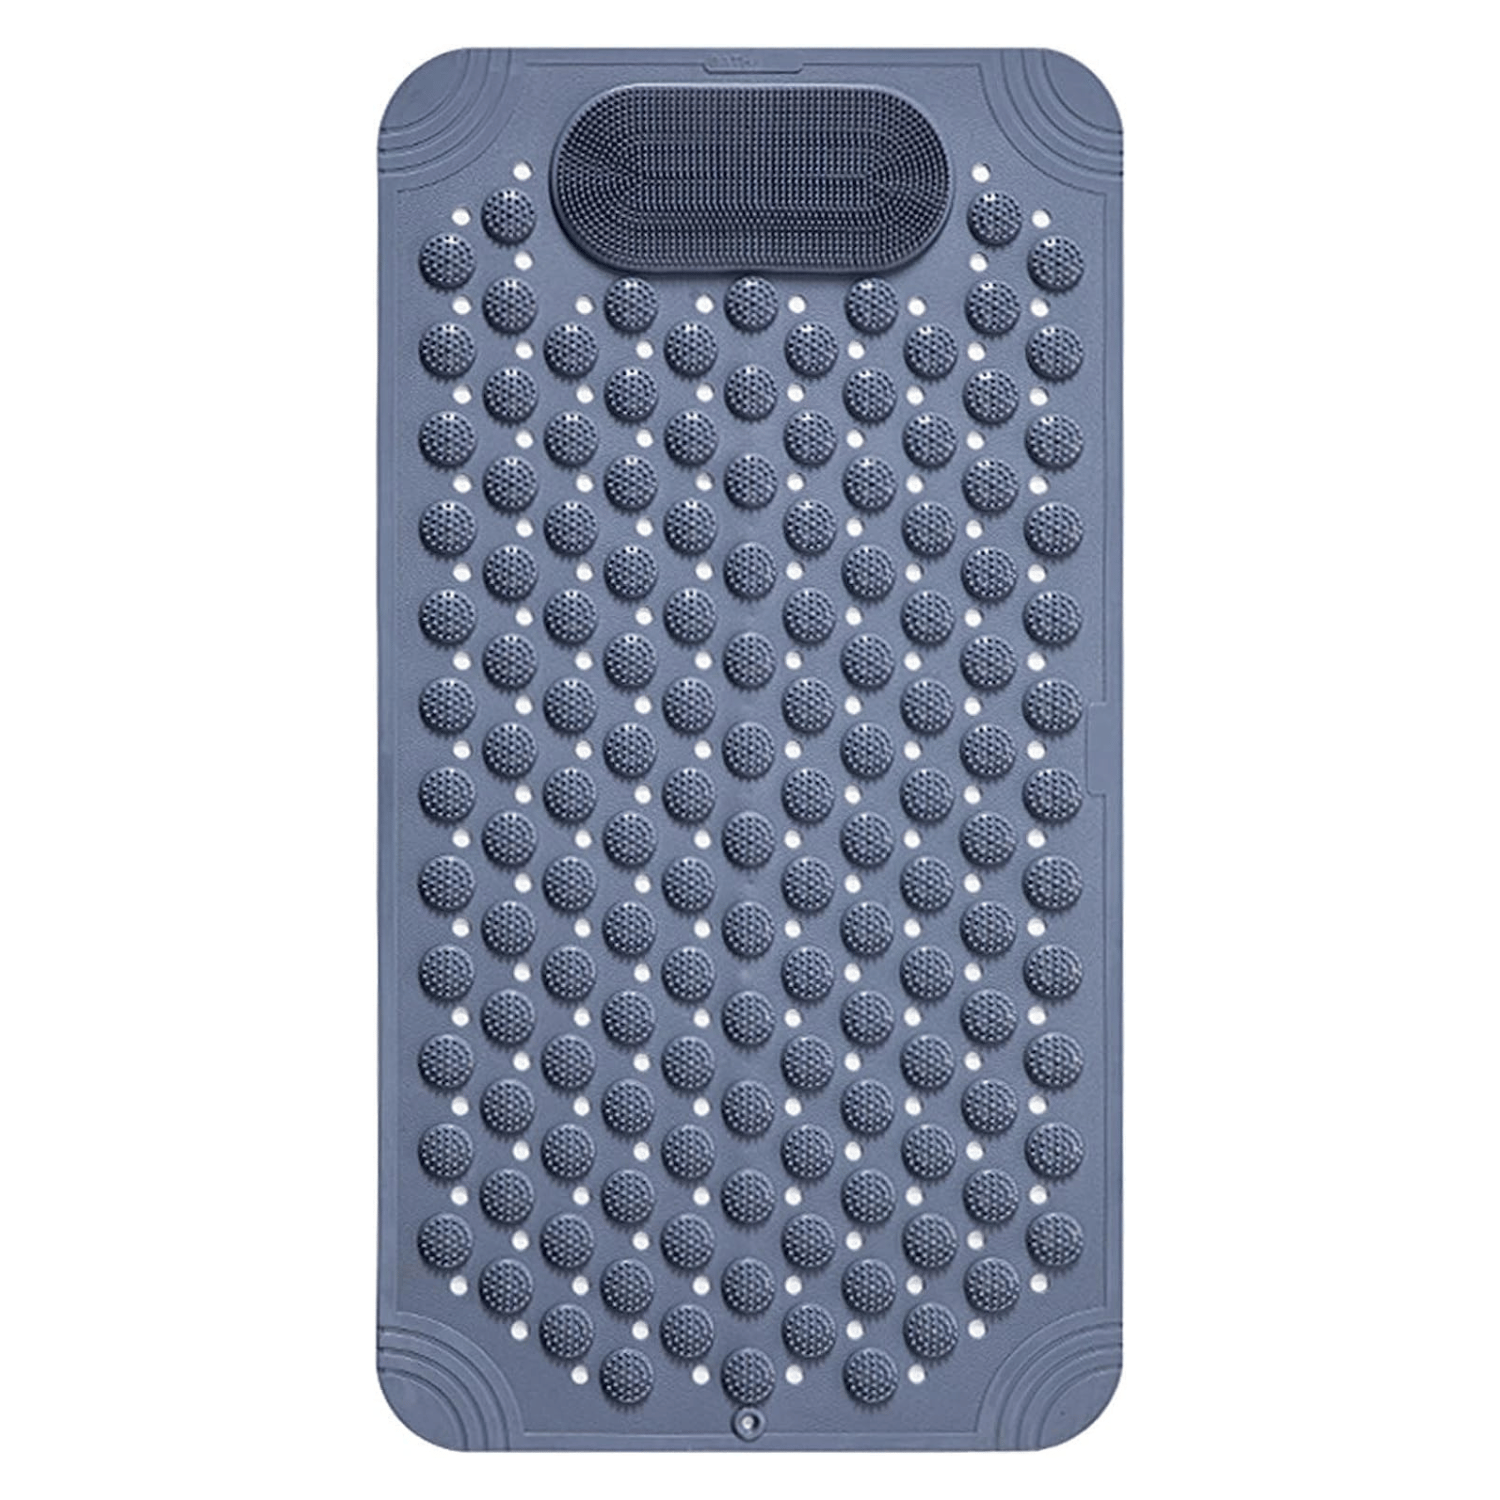 Anti Skid Mat for Bathroom Floor Shower mats for Bathroom Anti Slip with Foot Scrubber Bath mat Anti Slip with Suction Cups & Drain Holes (70x35 Cm)